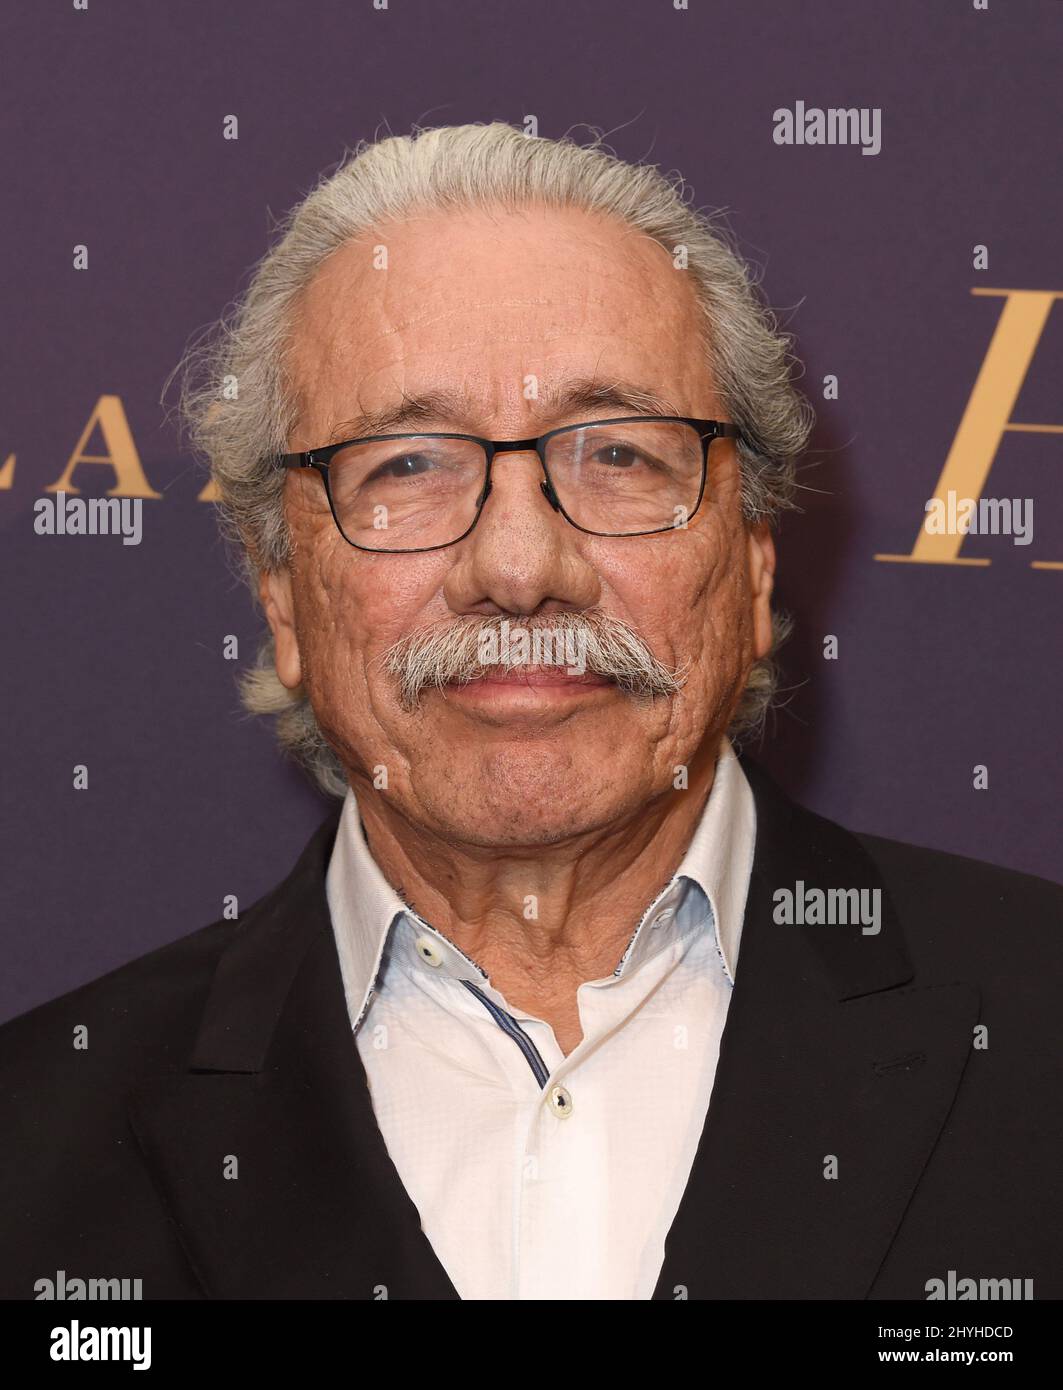 Edward James Olmos at The Hollywood Reporter's 7th Annual Nominees Night held at CUT at Beverly Wilshire on February 4, 2019 in Beverly Hills, CA. Stock Photo